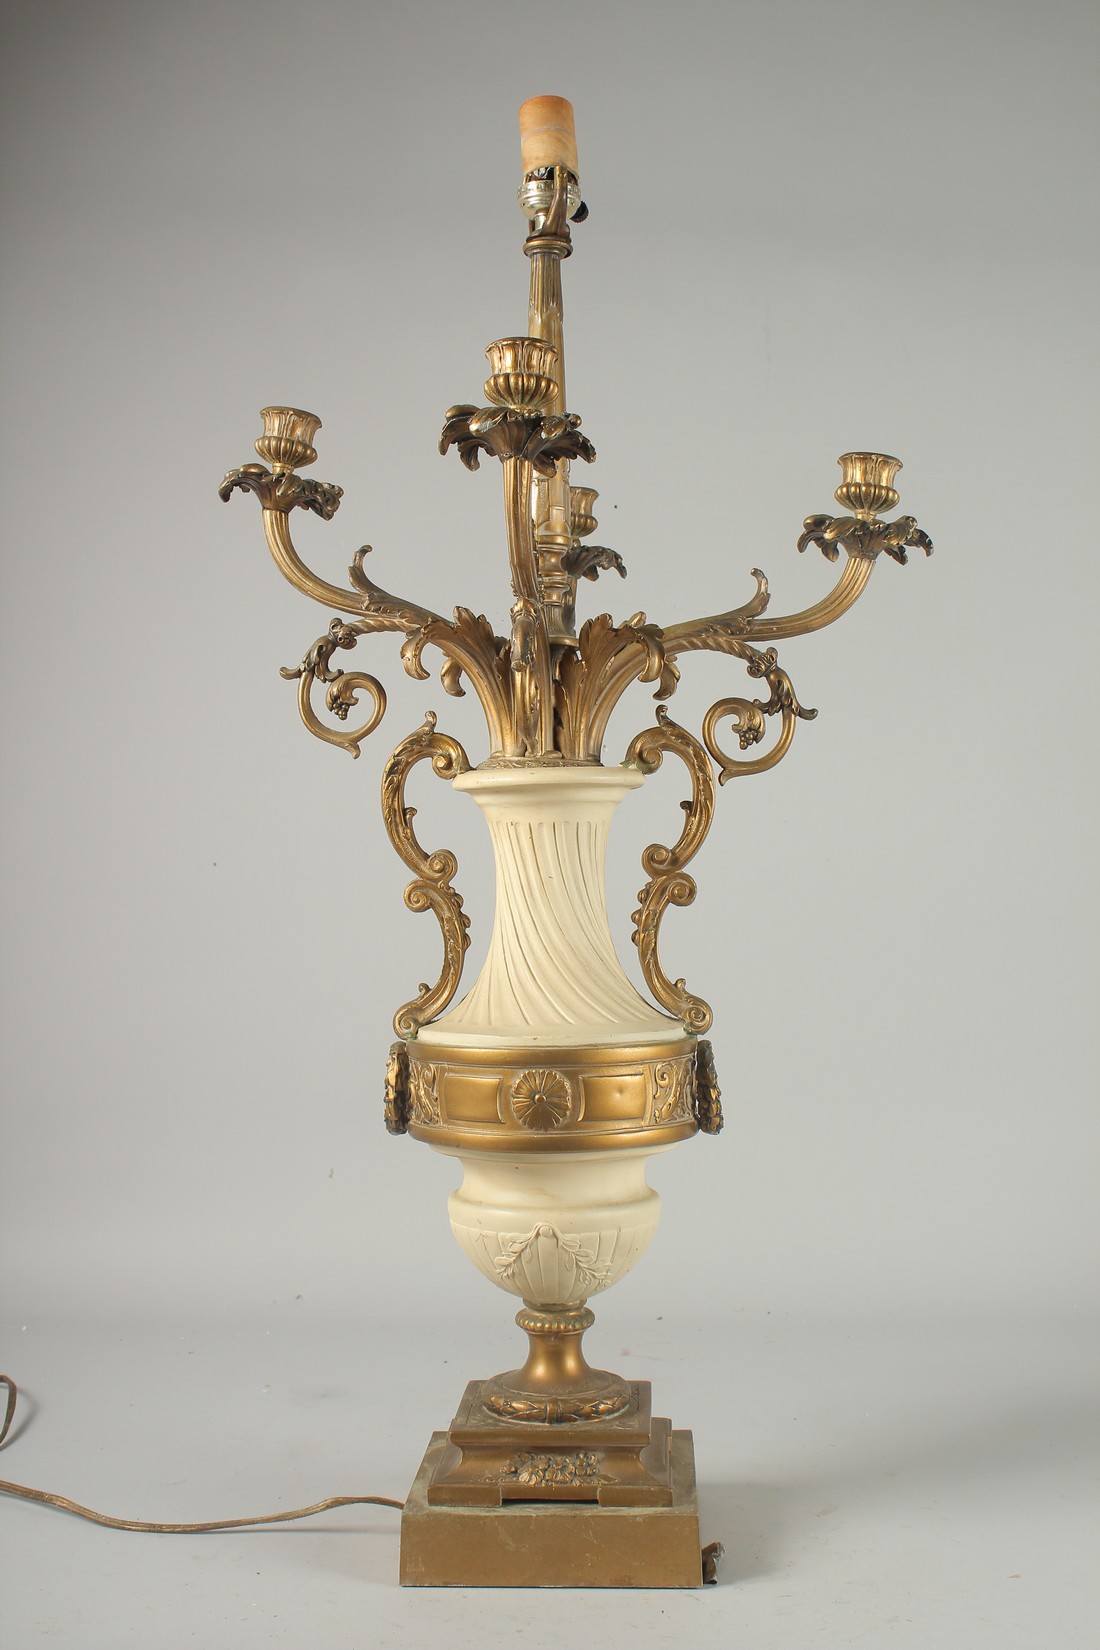 A 19TH CENTURY FRENCH WHITE MARBLE AND FOUR BRANCH ORMOLU LAMP on a square base. 29ins high. - Image 4 of 5